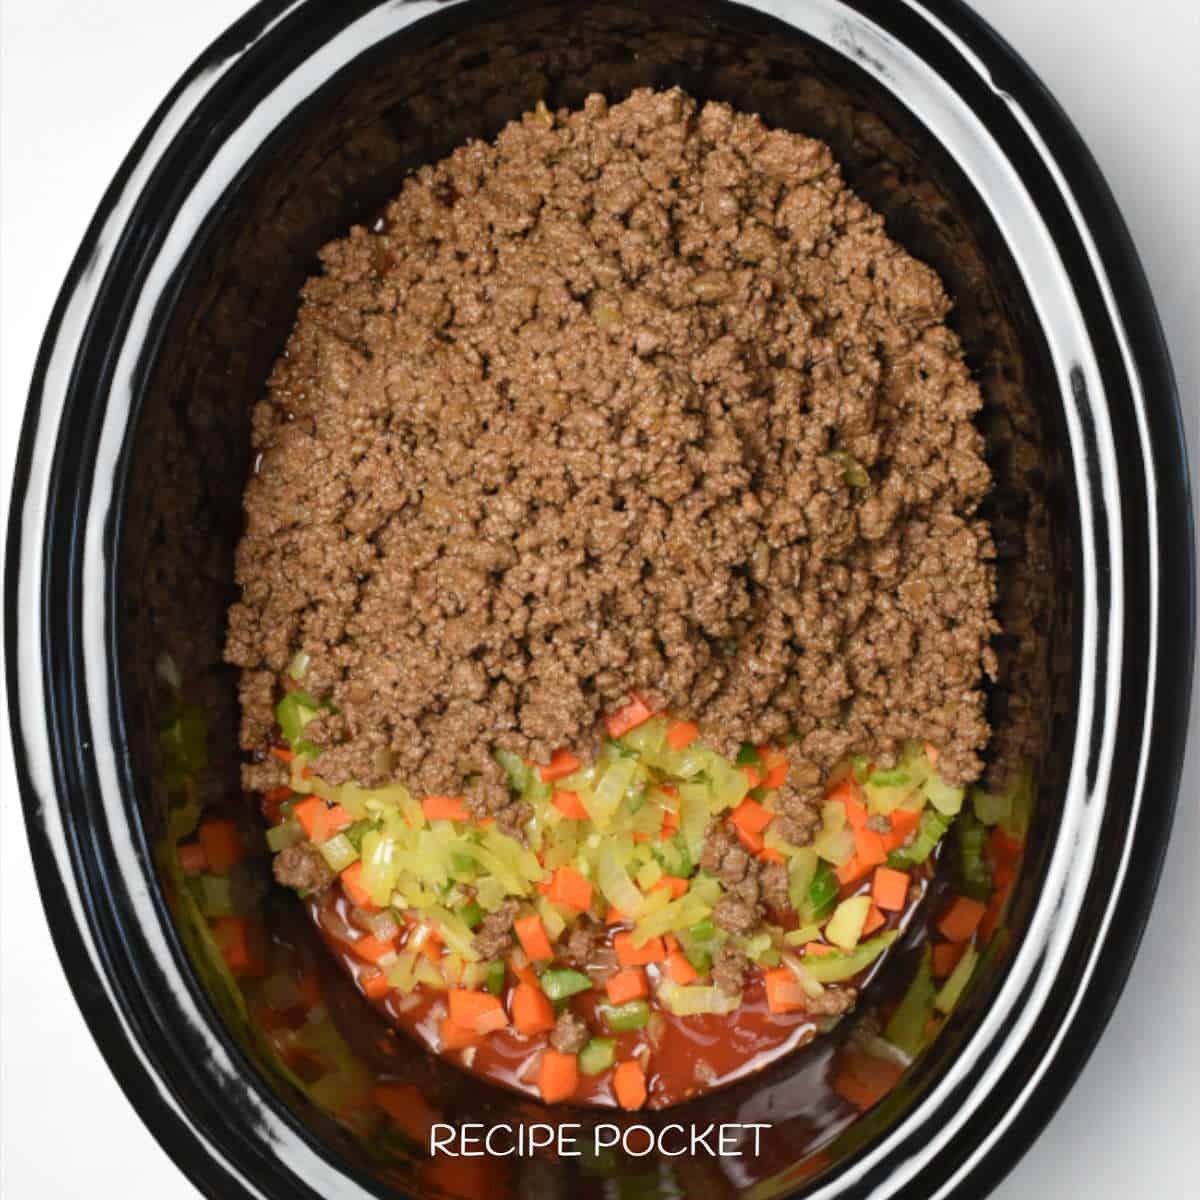 Ground beef in a slow cooker bowl with tomatoes and cooked vegetables.